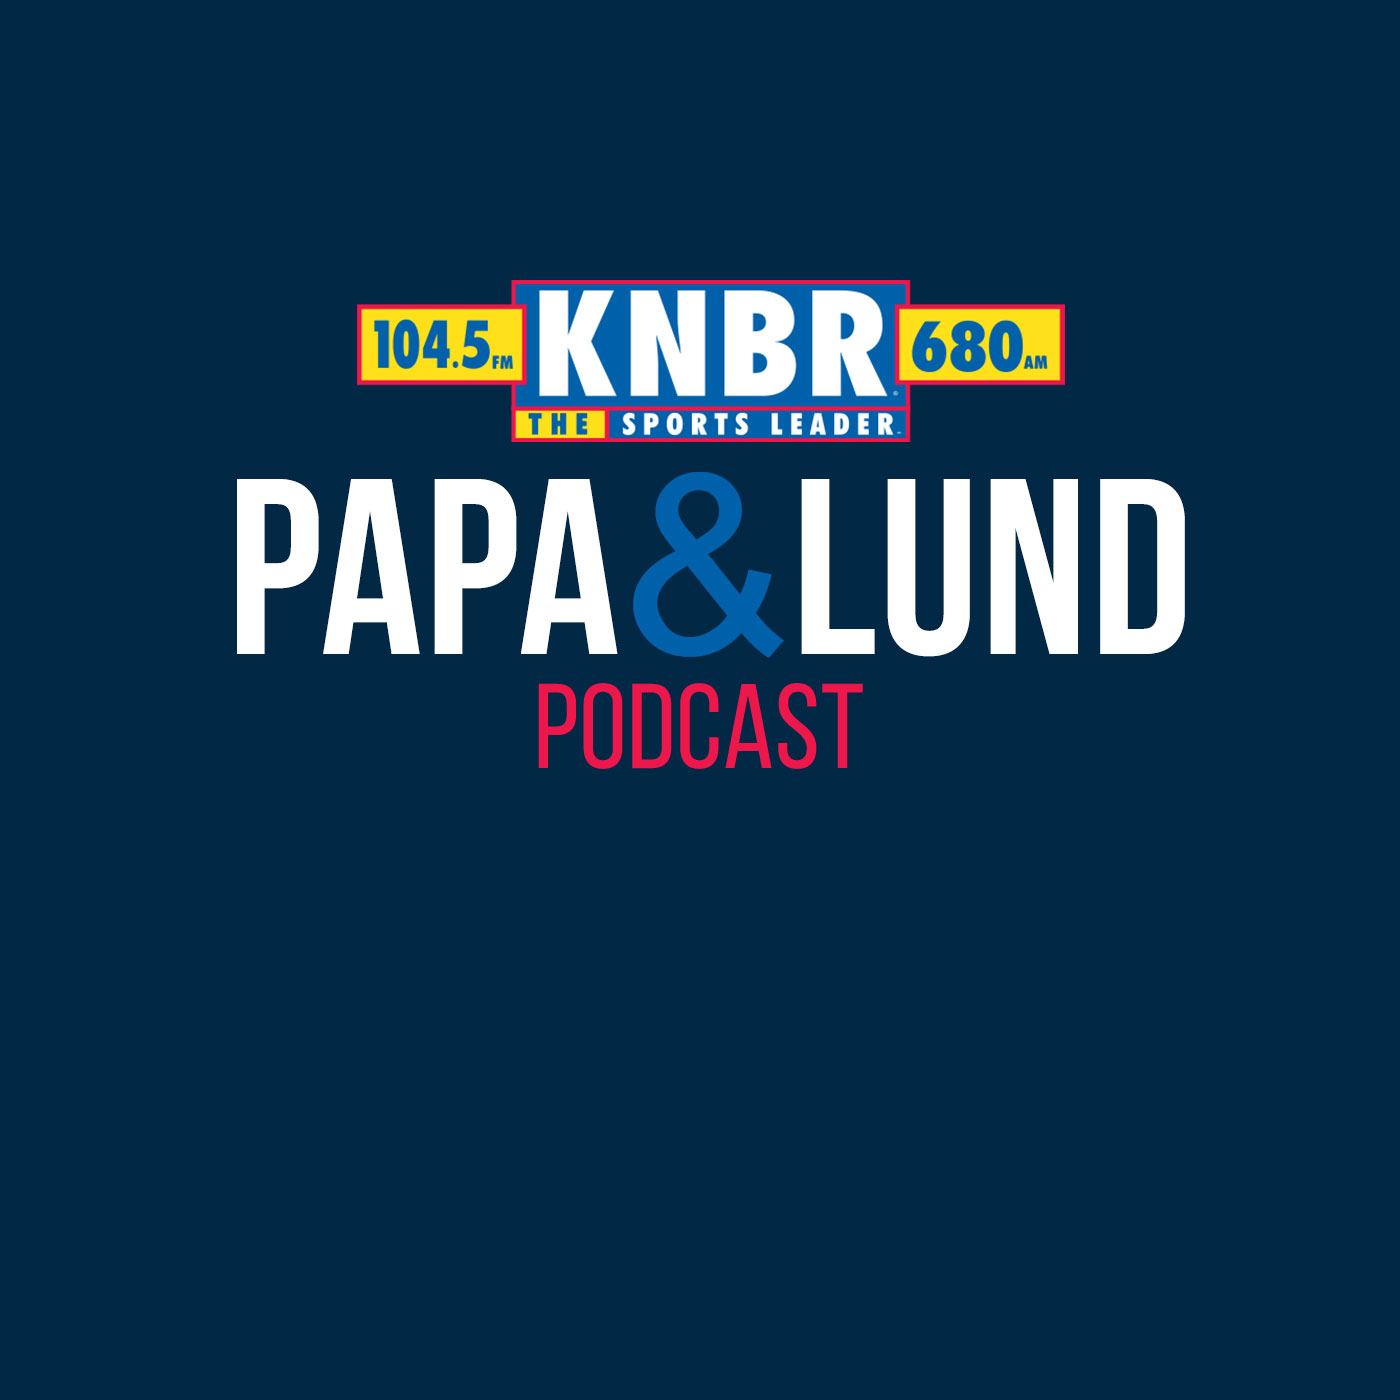 5-1 Connor Letourneau joins Papa & Lund to discuss the greatness of Steph Curry's performance in Game 7 and how the series against the Lakers will look completely different than the Kings style of play